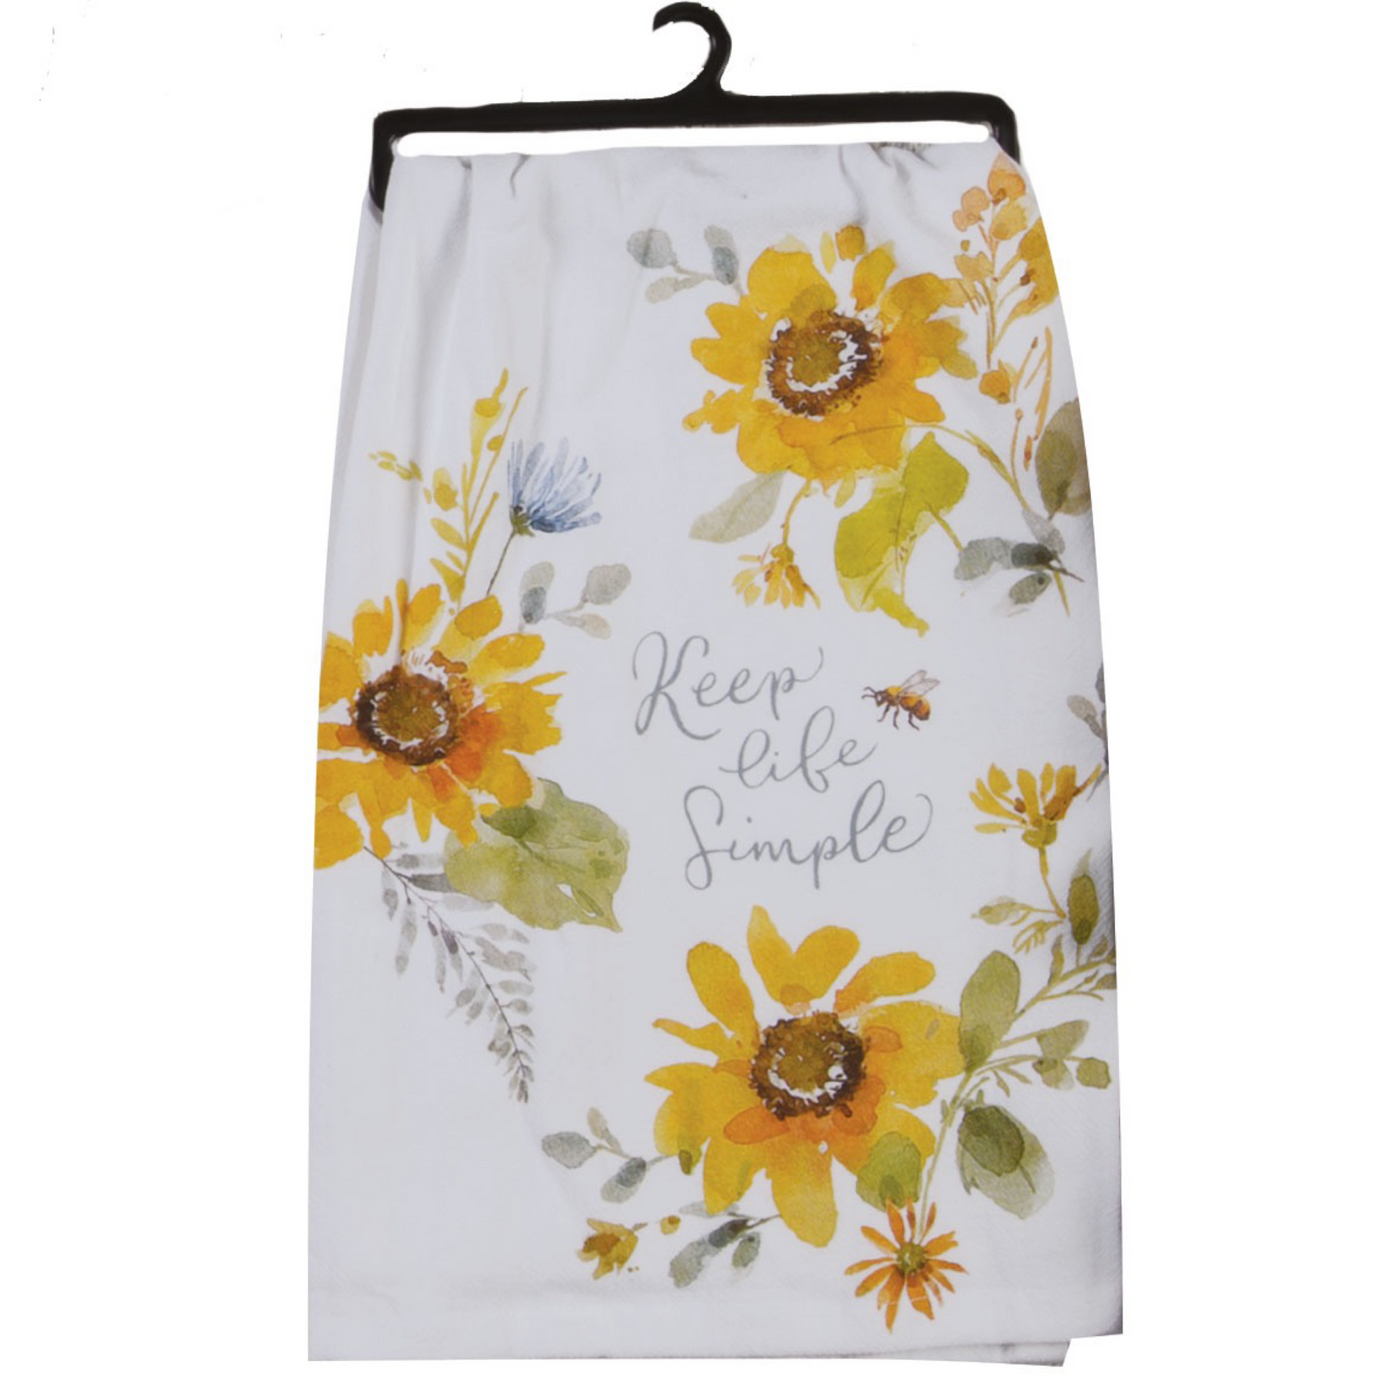 White flour sack towel with printed sunflowers and phrase keep life simple 